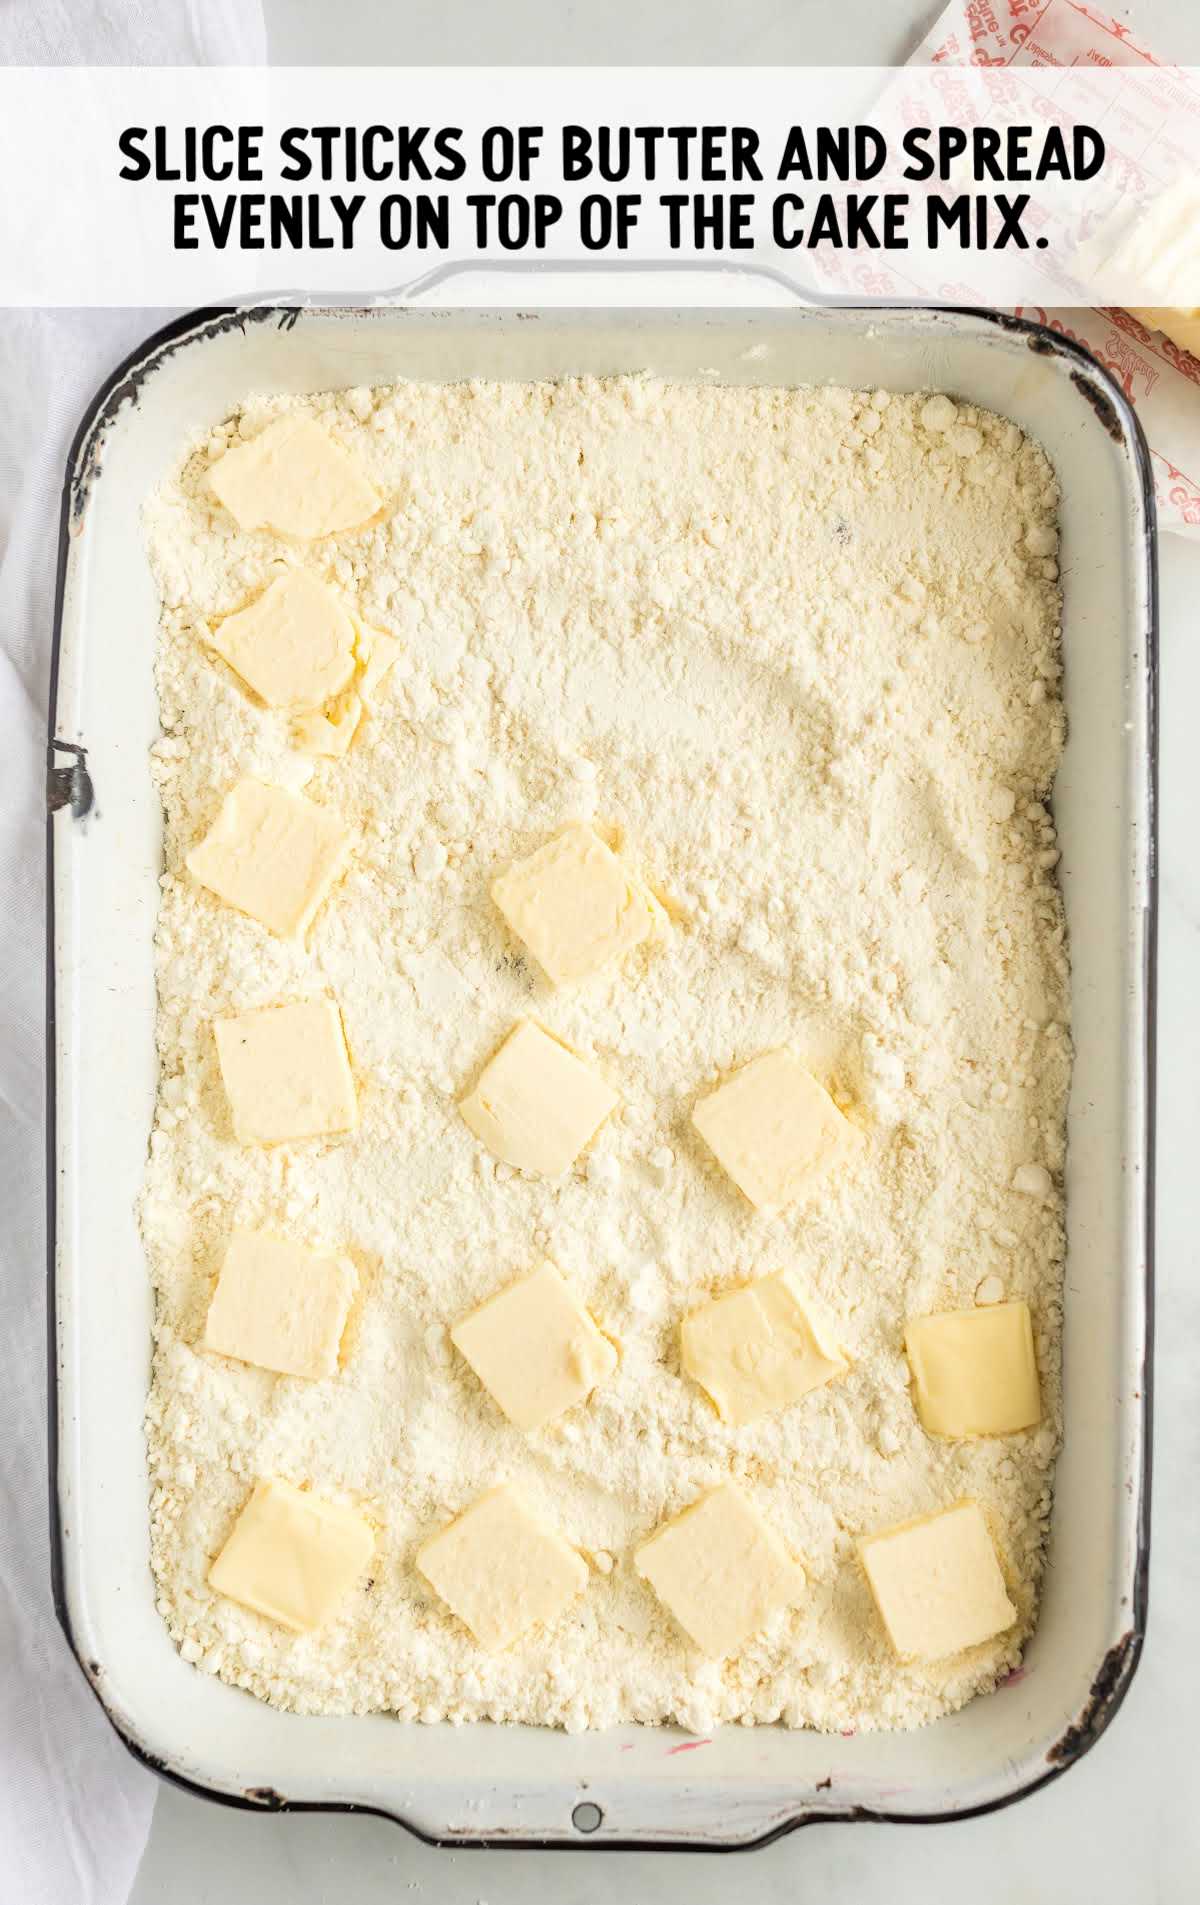 slices of butter being spread over cake mix in a baking dish